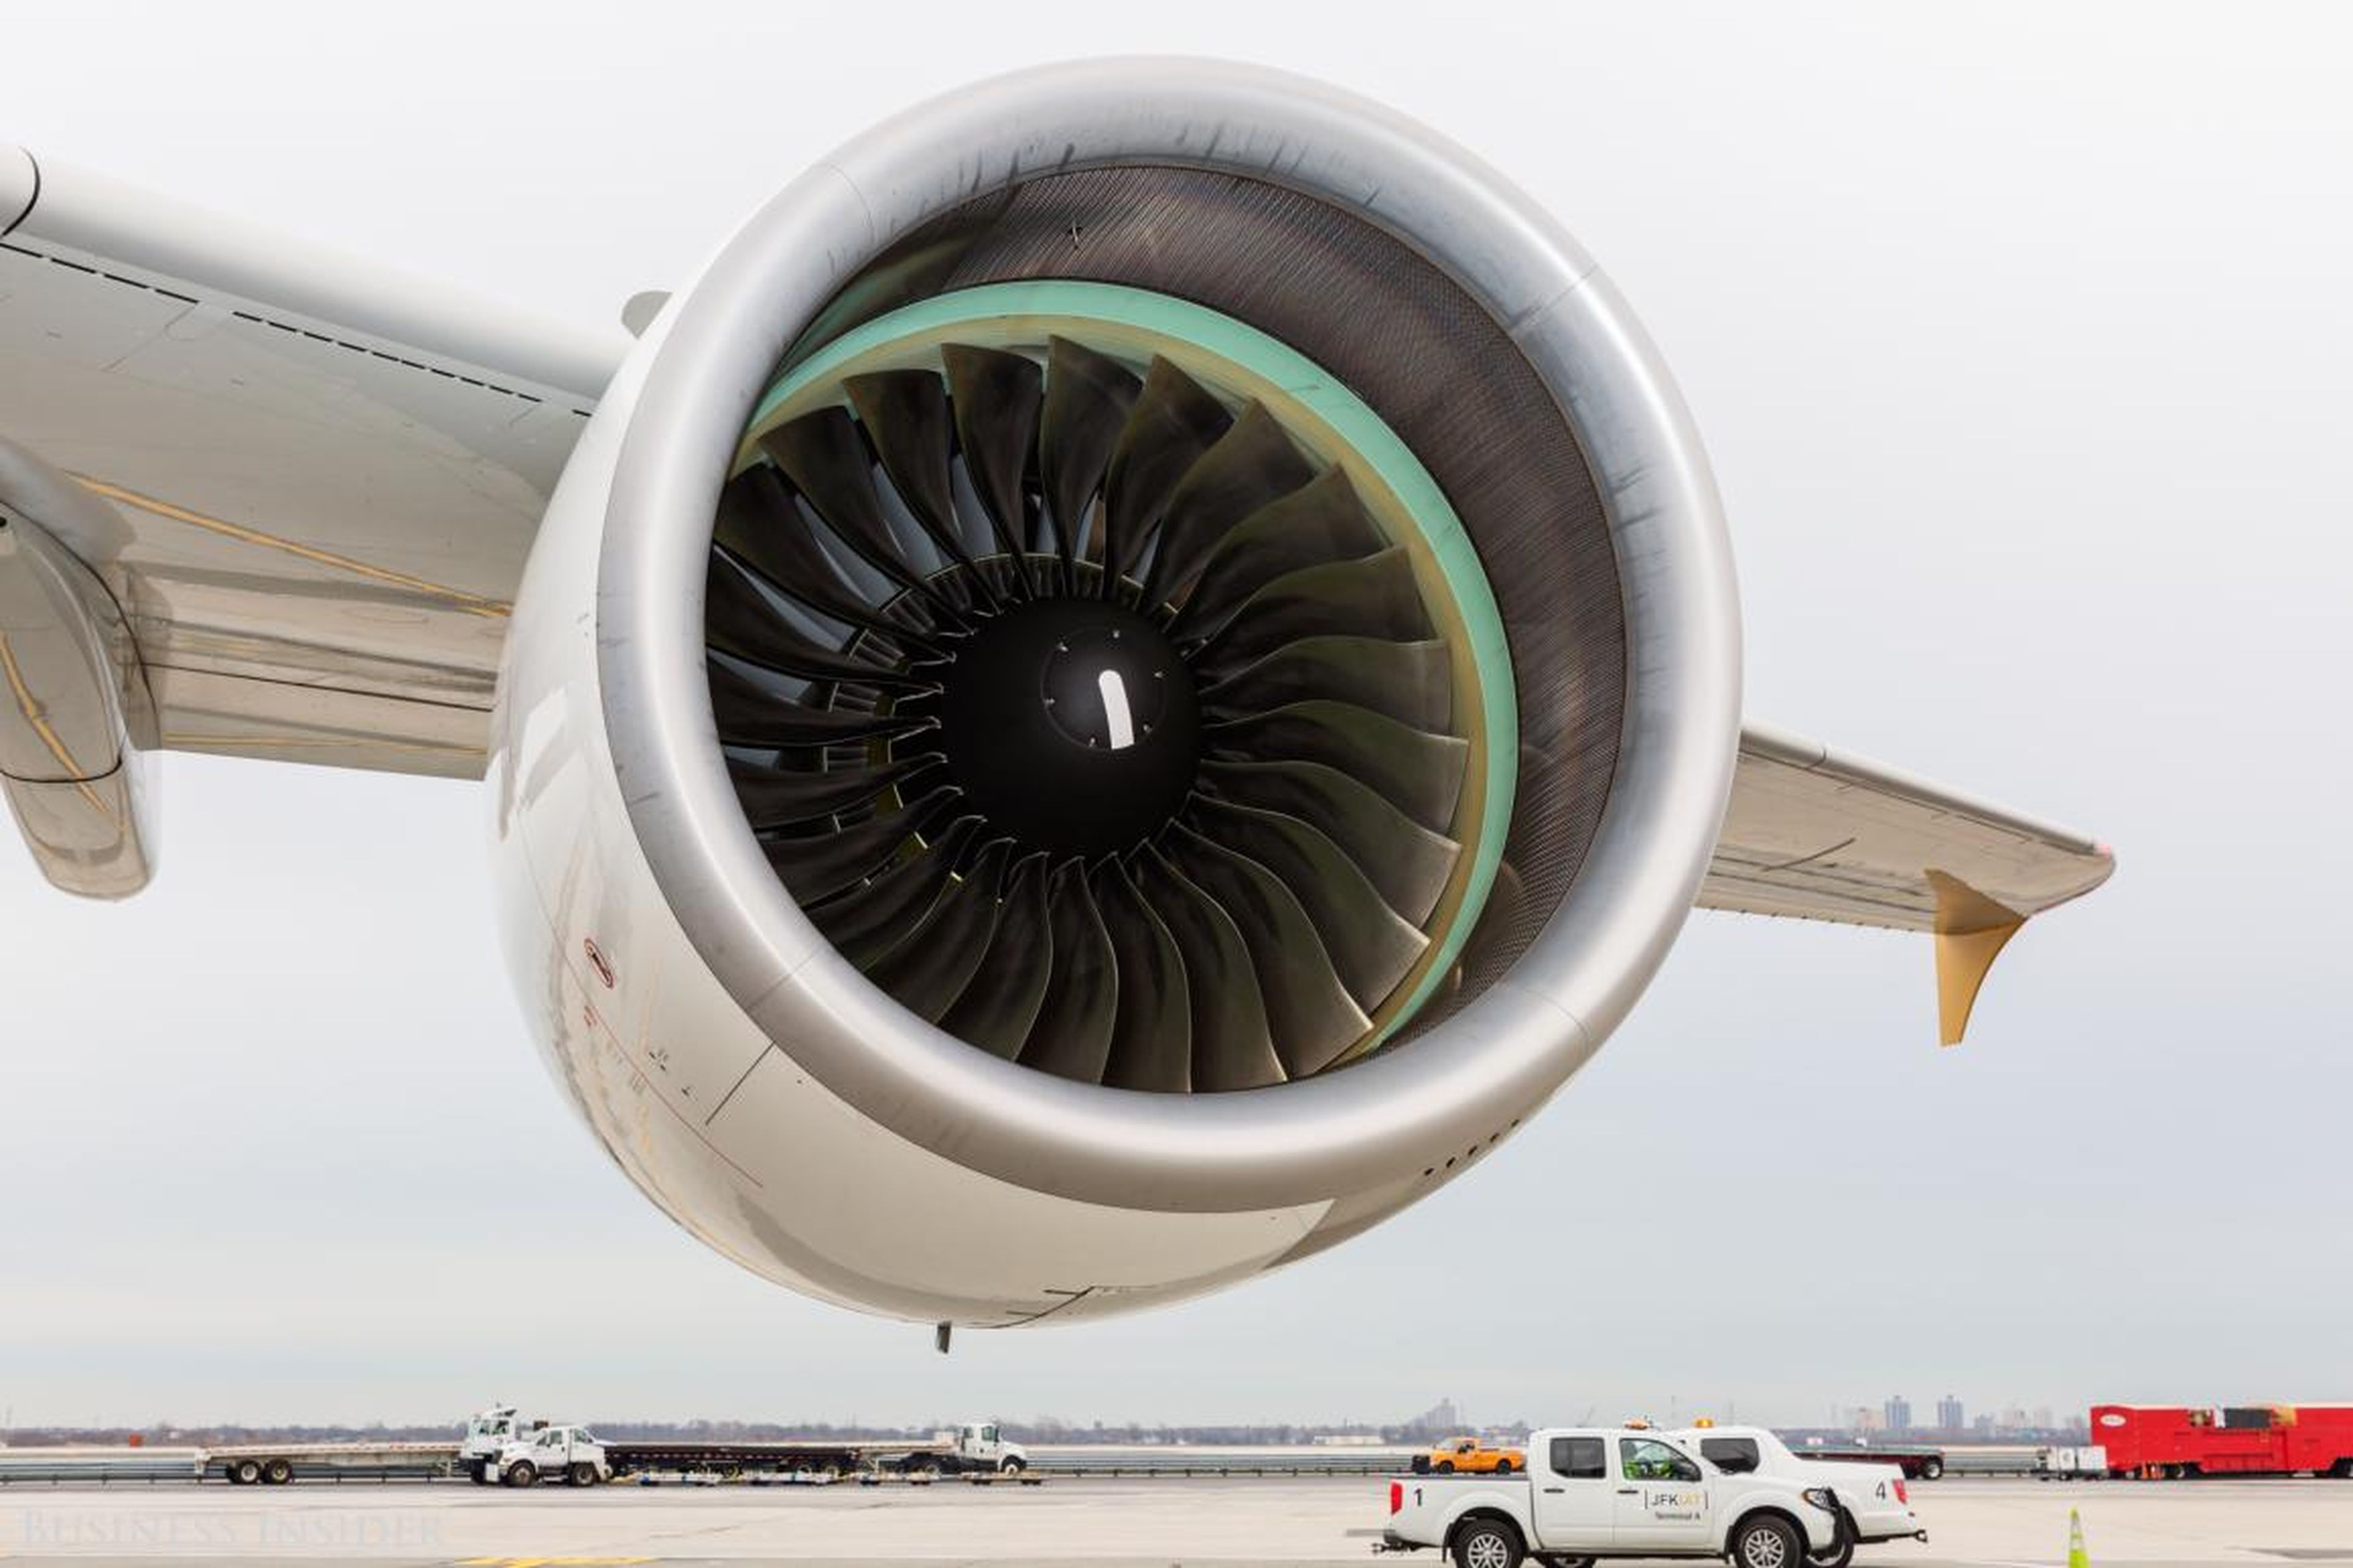 Power for the A380 comes from a quartet of engines from suppliers Rolls-Royce and Engine Alliance.